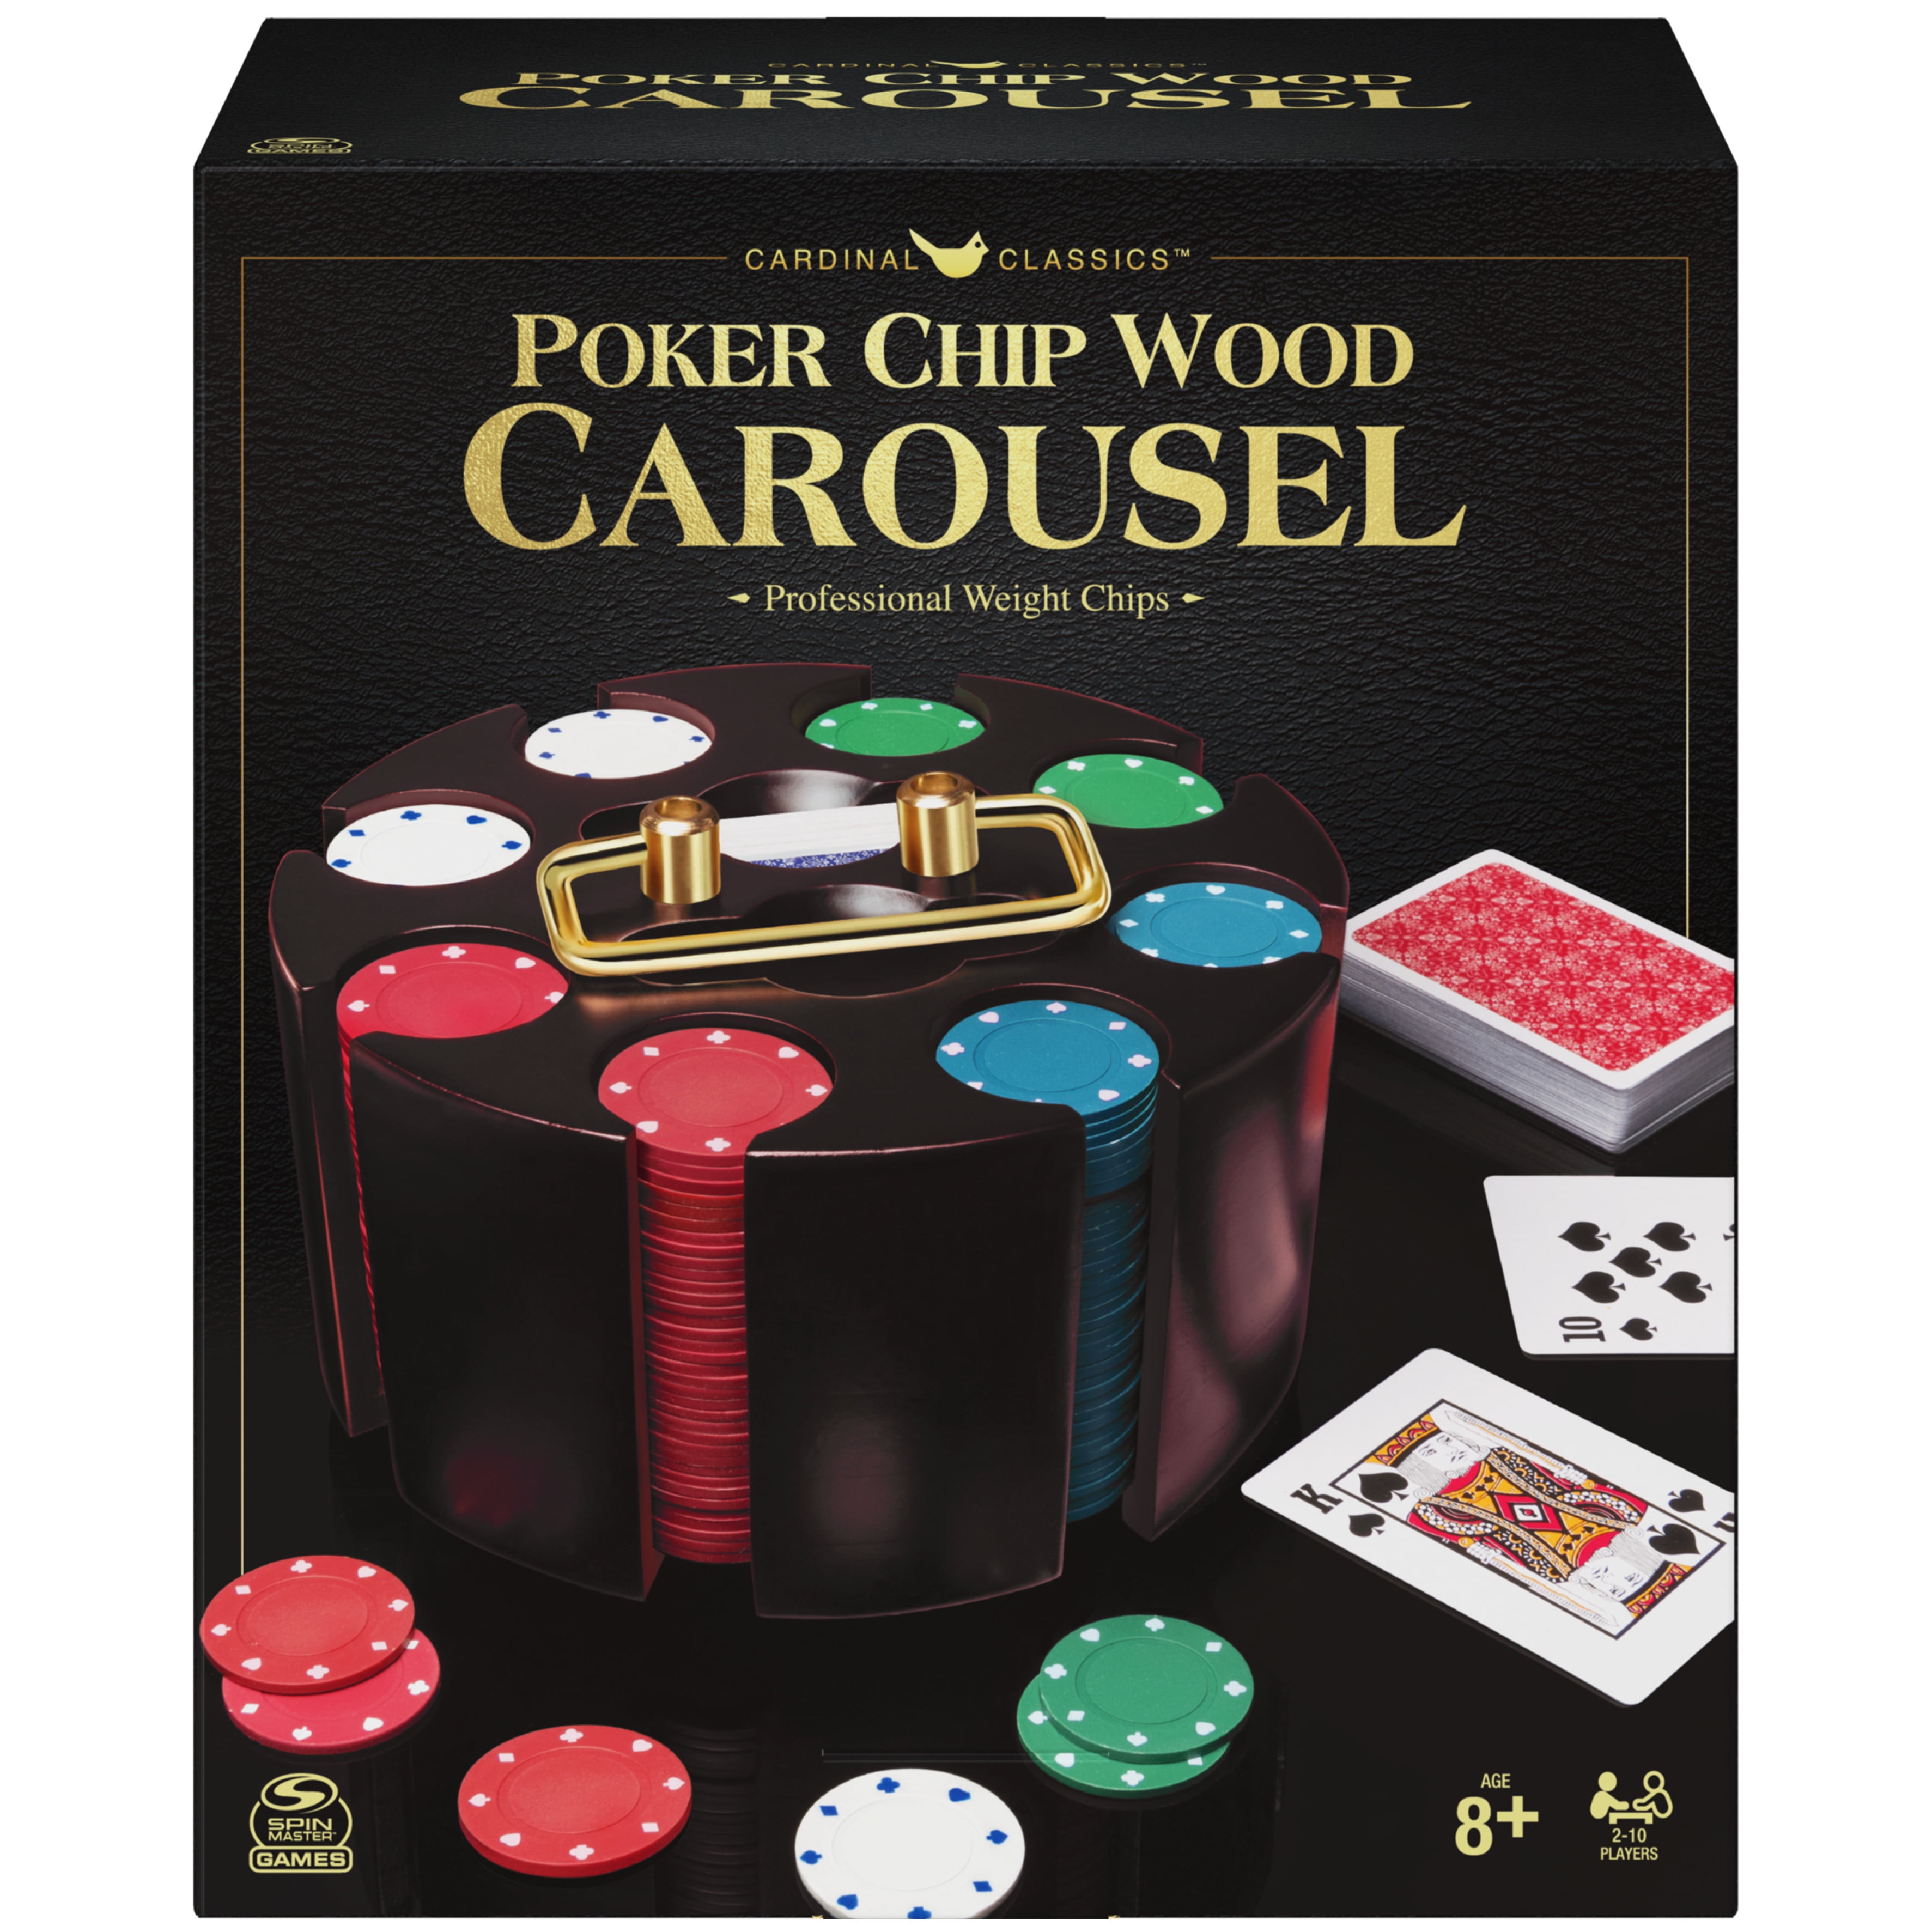 OS/2 BLACK JACK AND POKER GAME SOFTWARE BUNDLE FOR OS/2 USERS AND COLLECTORS 